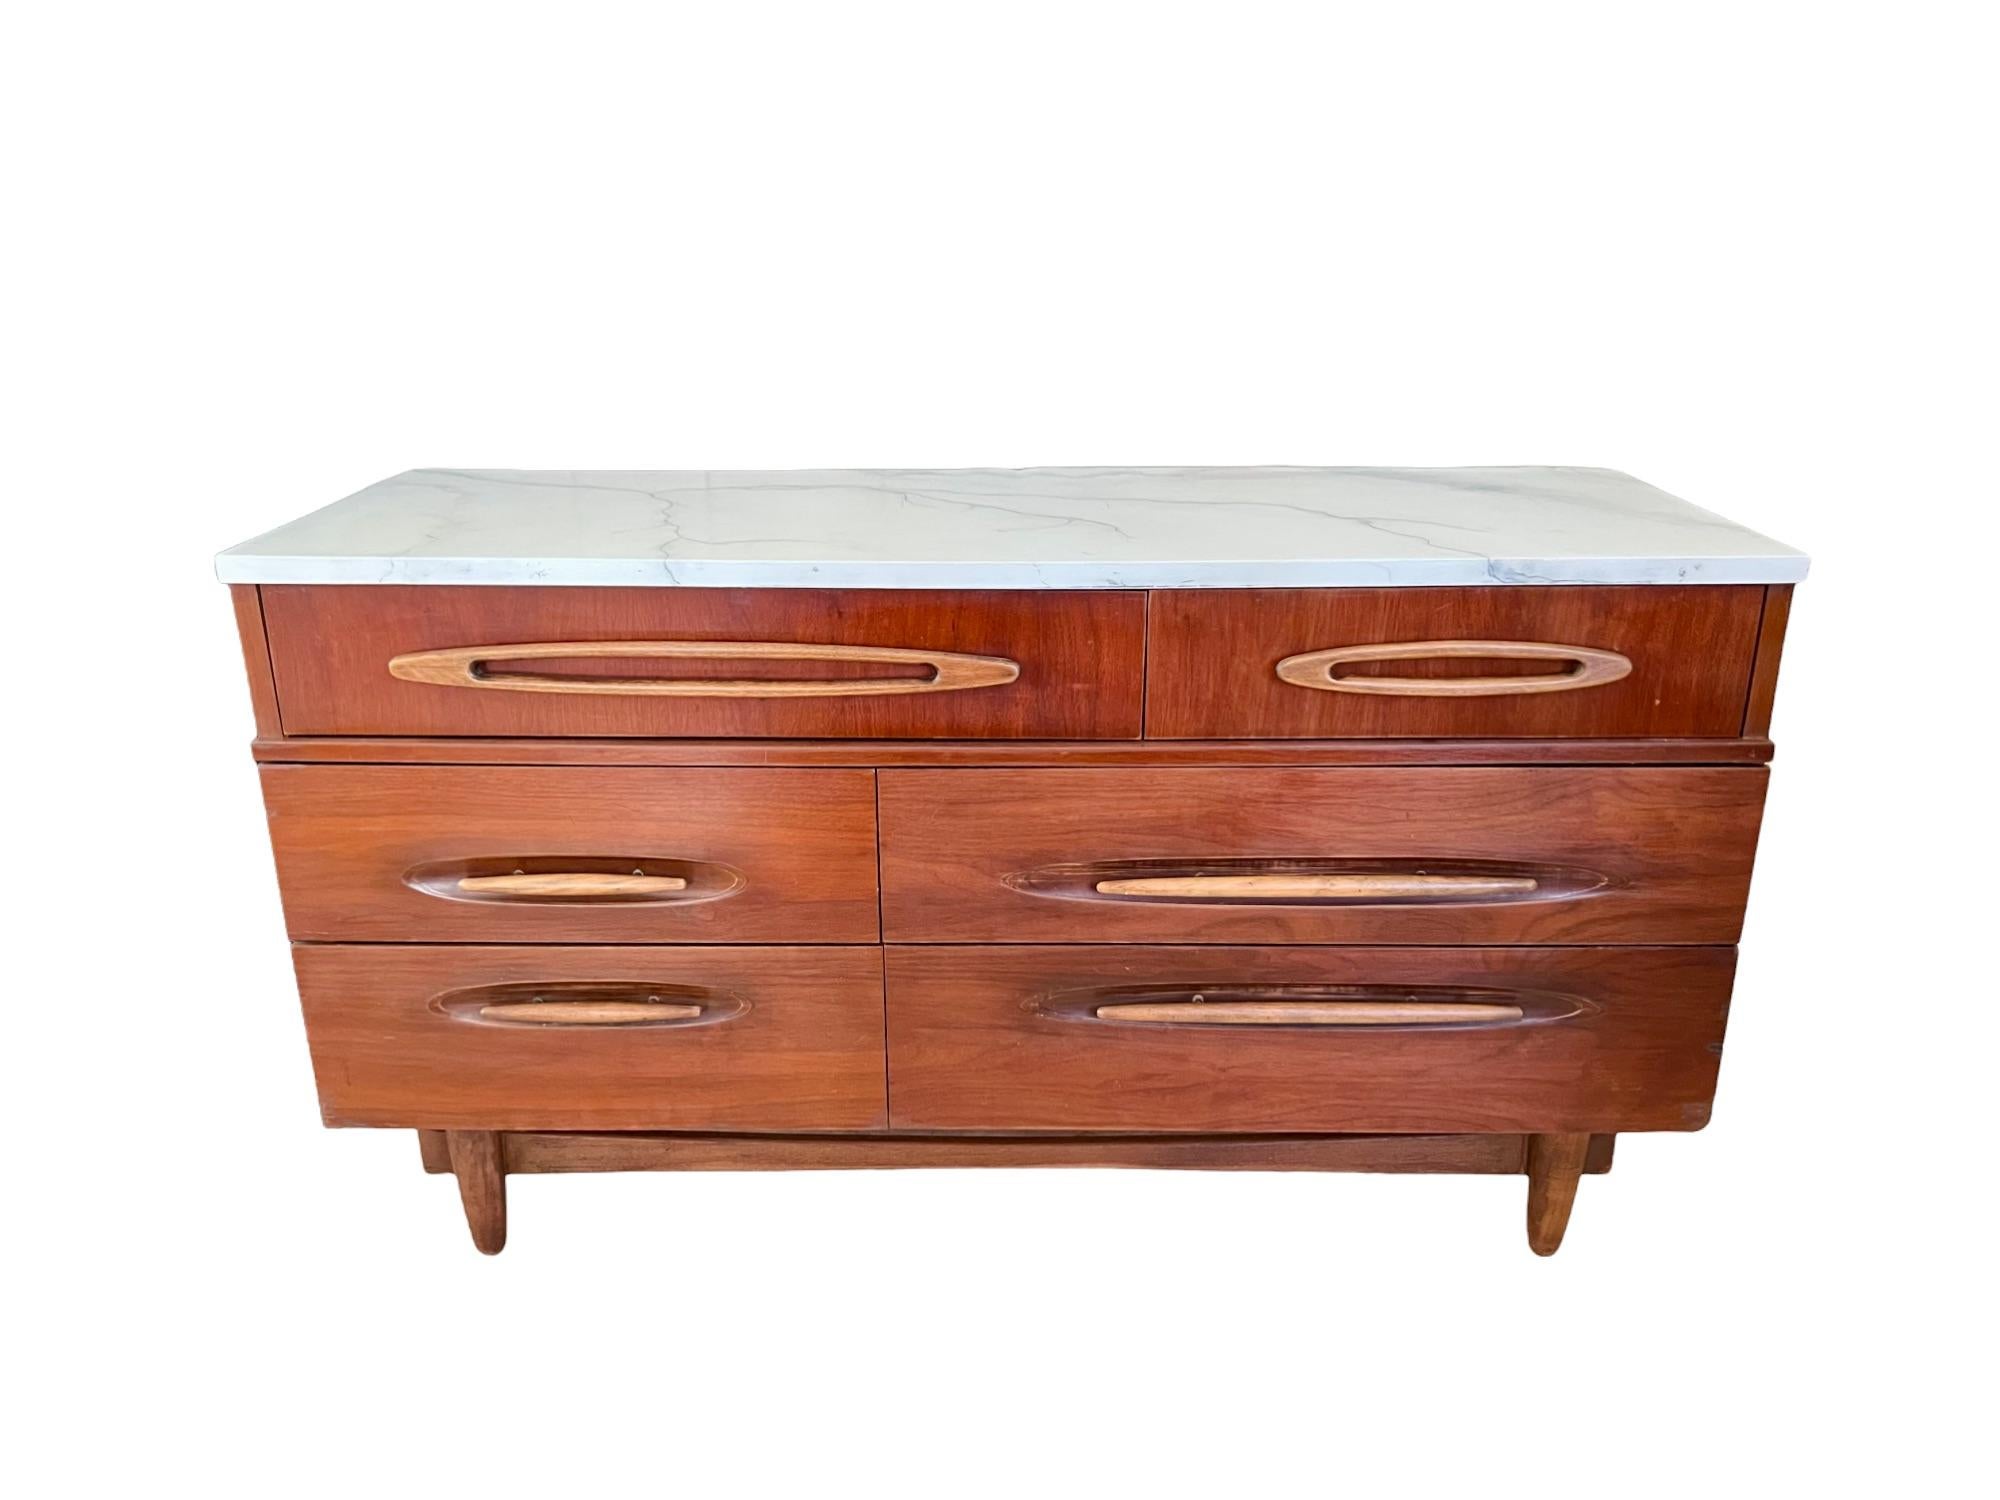 A vintage mid-century modern six drawer dresser by Ward Furniture. Featuring a hand painted faux marble wood top in white with cream, gold, gray and blue undertones and veins in shades of gray, gold, blue and charcoal. Below, sculpted capsule-shape